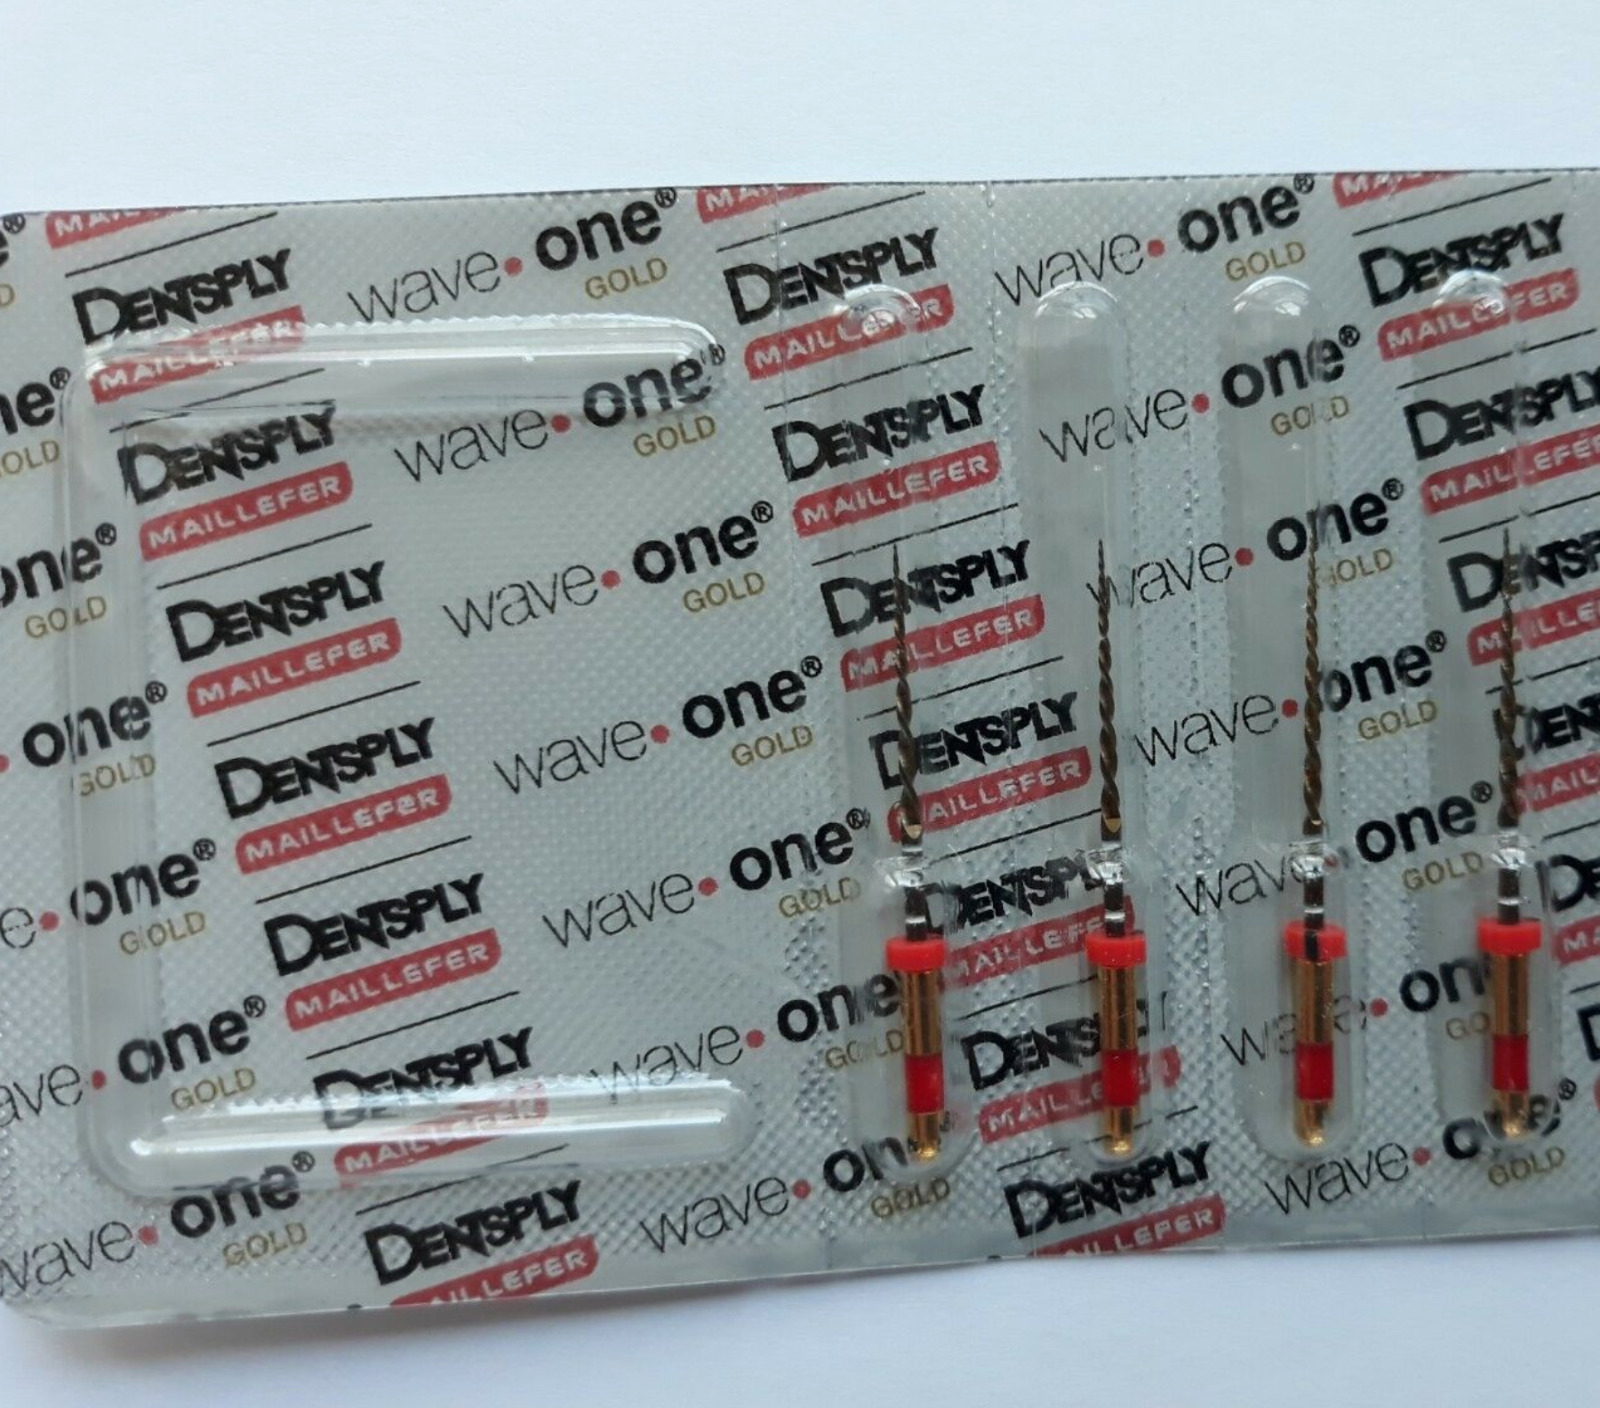 Waveone Gold Wave One Primary Red Endodontic File Root Canal Dentsply 4pk 25mm